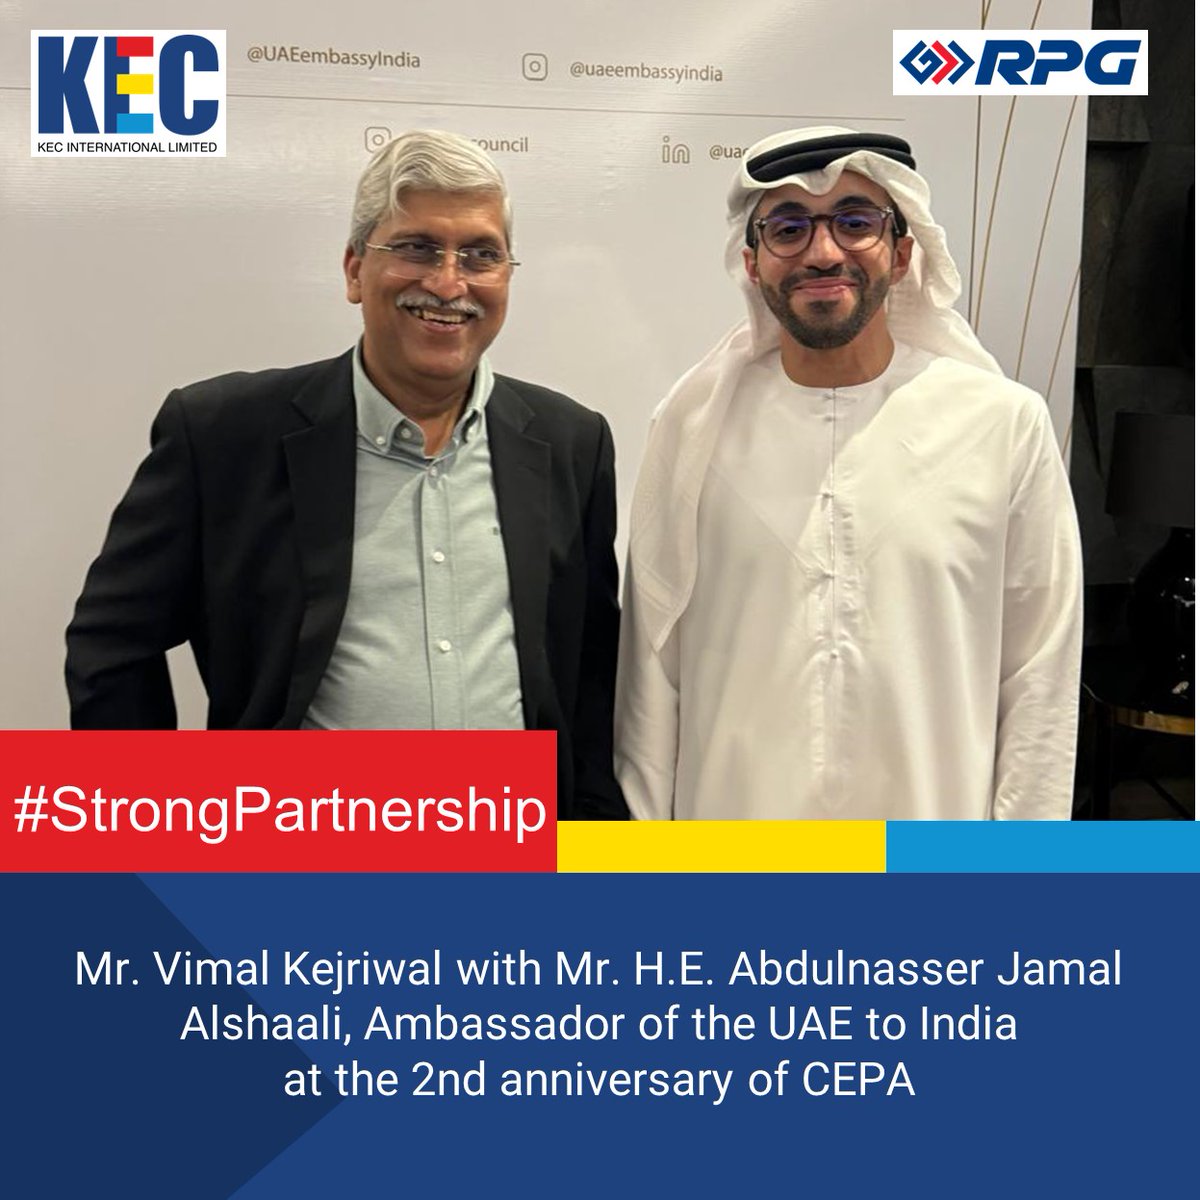 An honour to meet H.E. Abdulnasser Jamal Alshaali, Ambassador of the #UAE to #India, at the 2nd anniversary of CEPA! Proud of KEC's footprint in the UAE, contributing to transformative projects.
@kejriwalv1 @aj_alshaali @cepacouncil
#TwoYearsOfCEPA #KECInternational